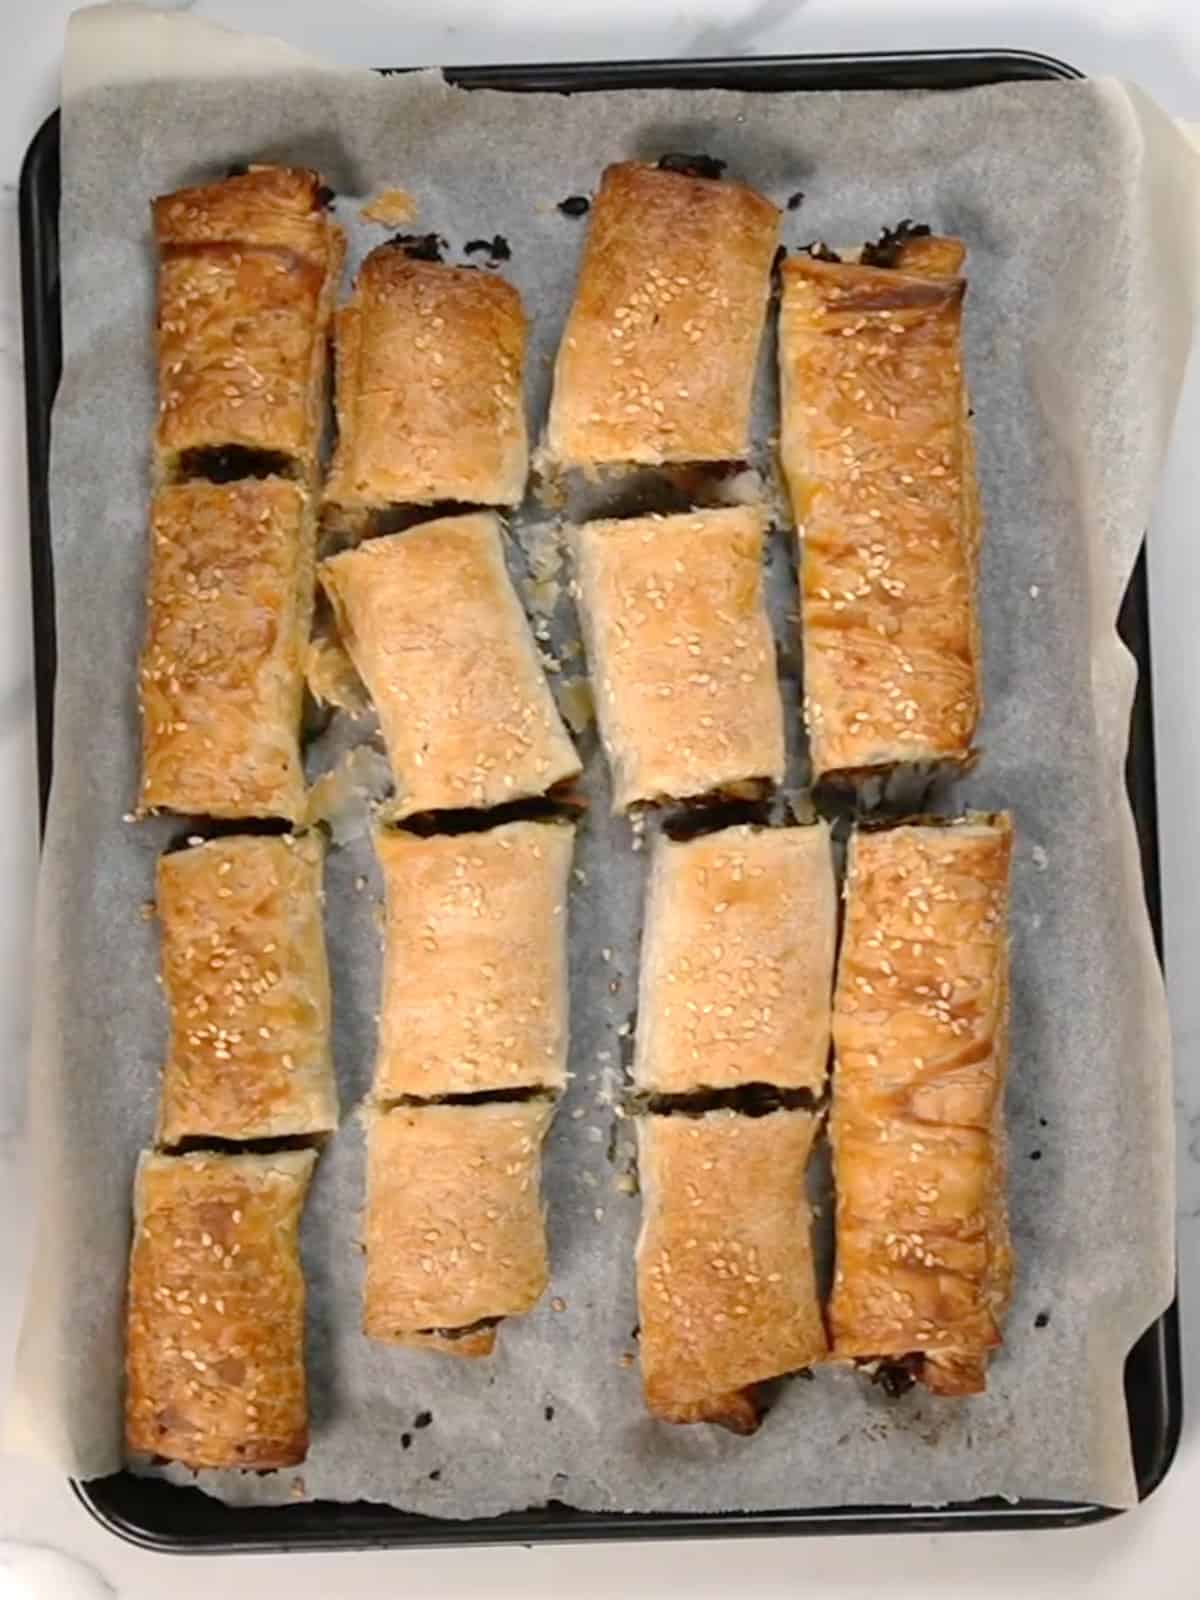 golden flaky puff pastry rolls on a paper lined tray